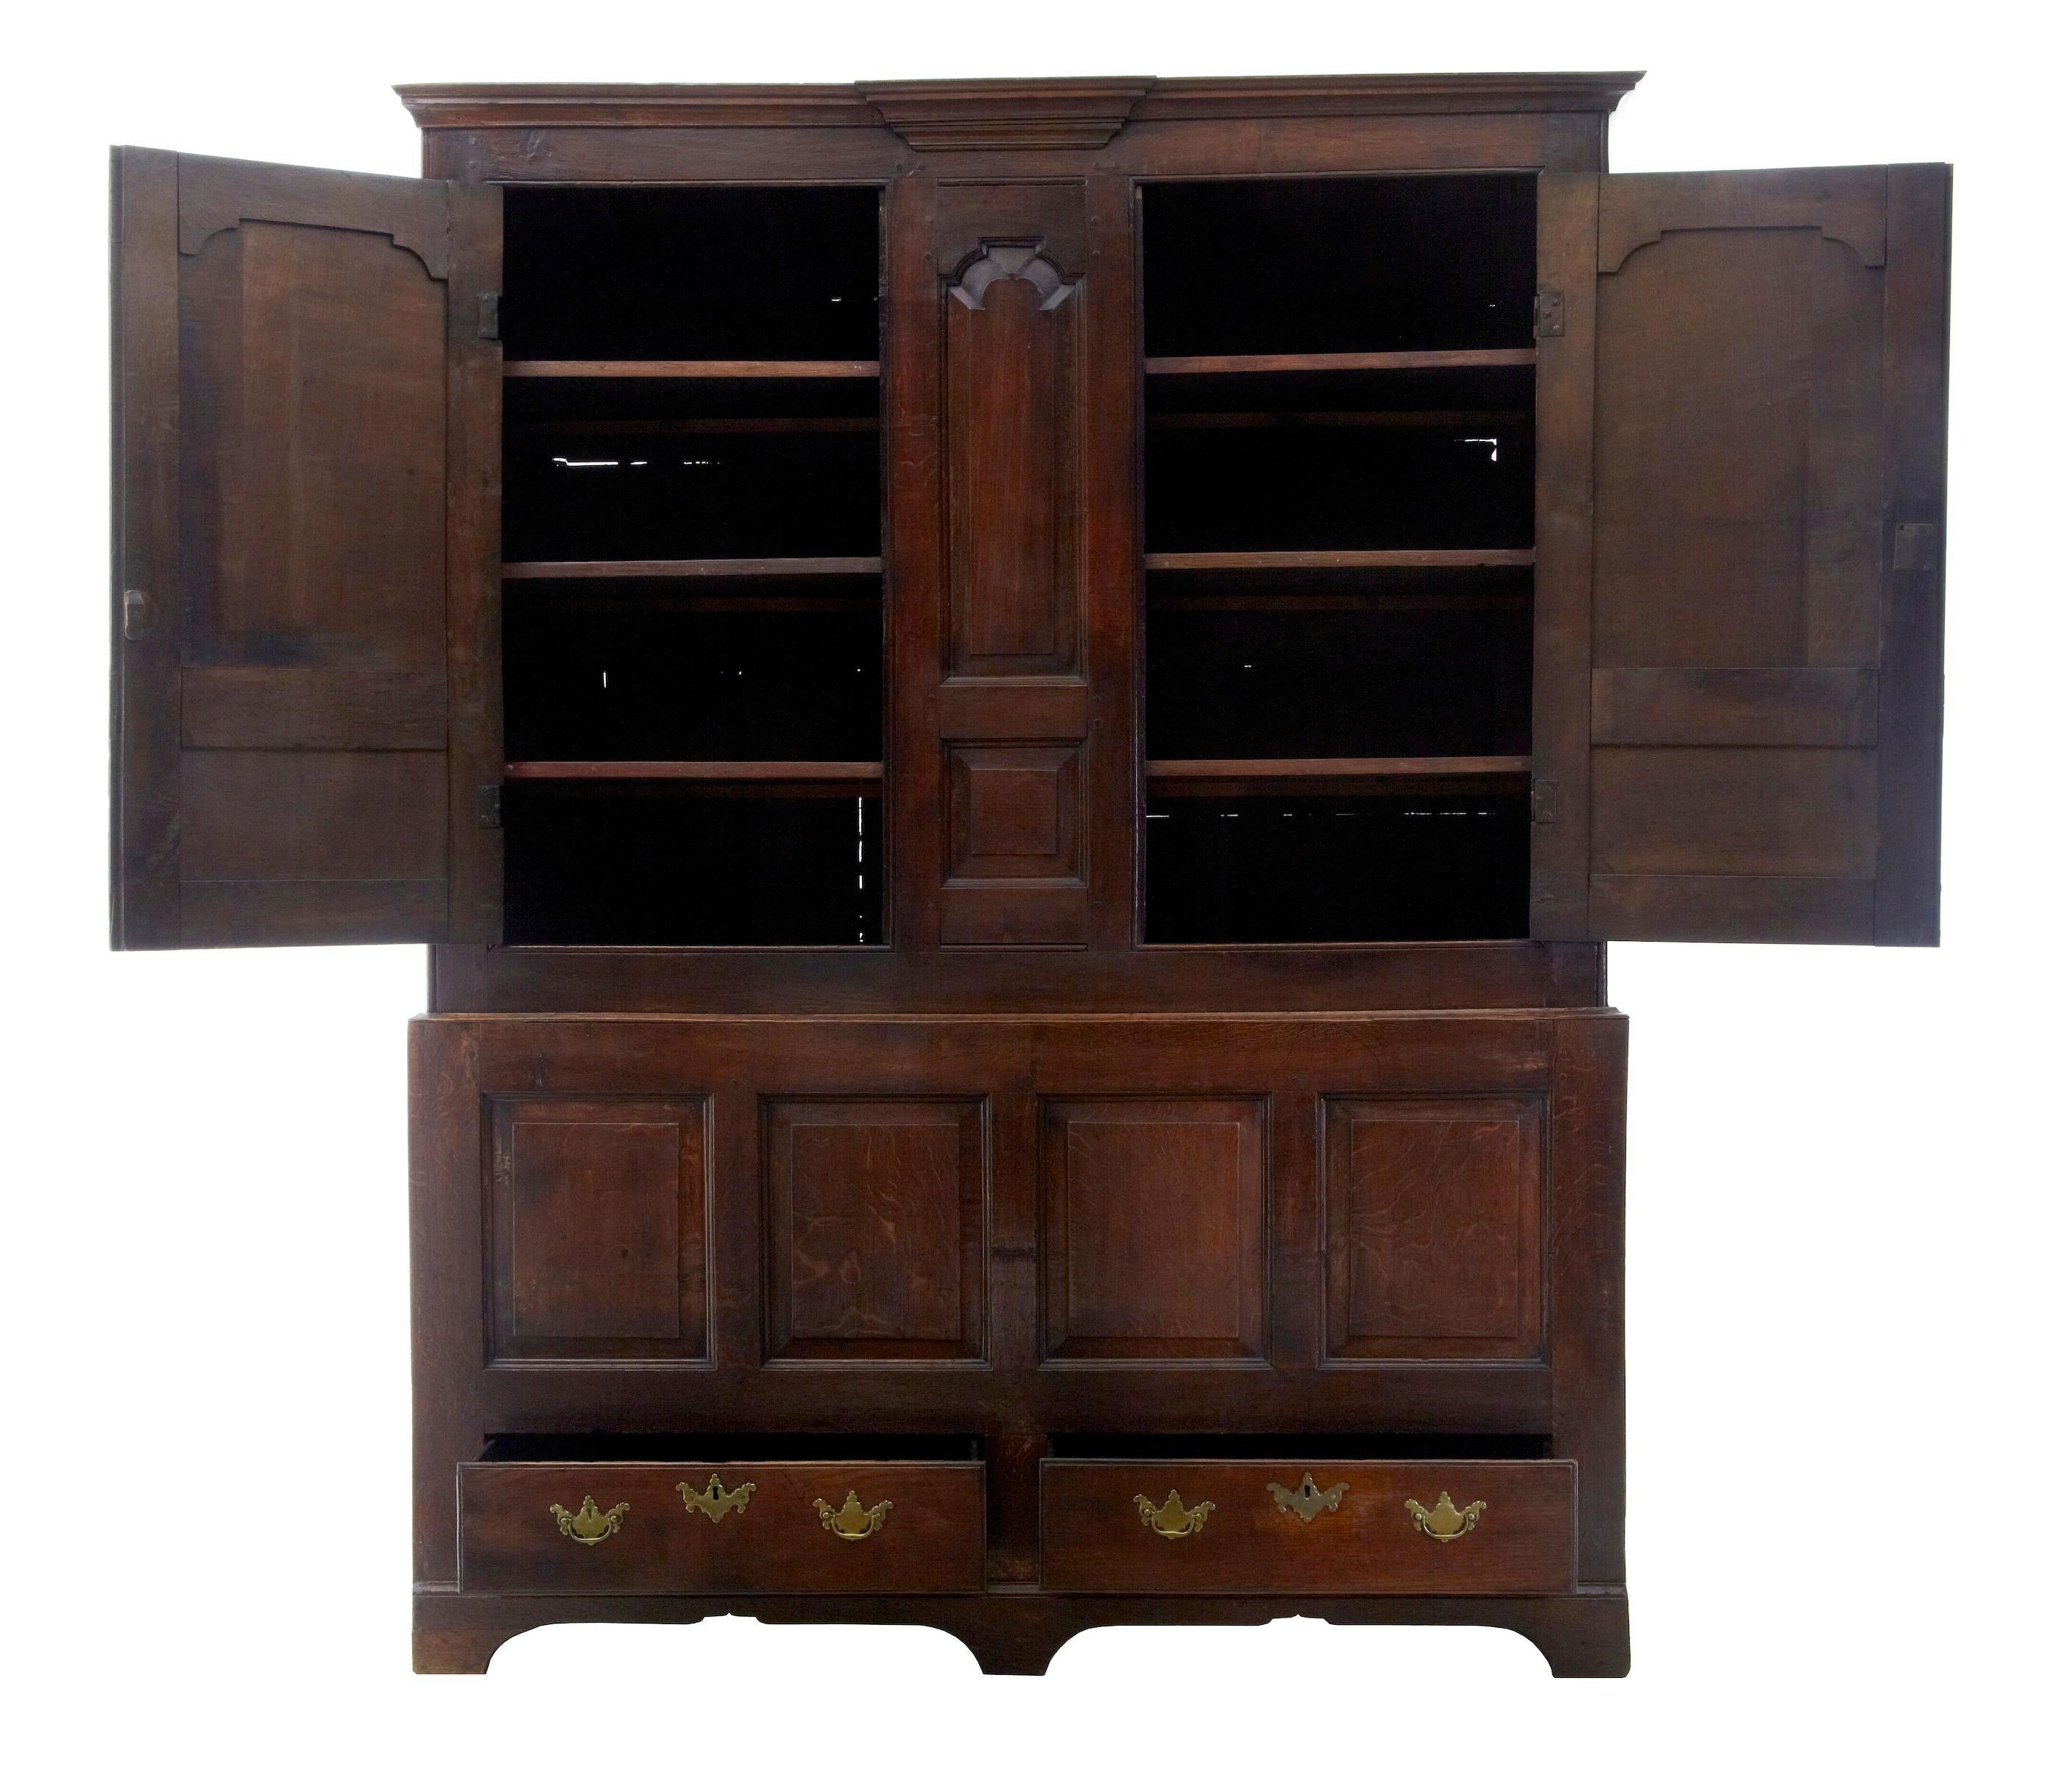 18th century English oak house keepers cupboard circa 1770.

2 part solid oak house keepers cupboard. Top section with fielded panel double doors which open to reveal 3 shelves on each side. Access to the bottom section is allowed from these